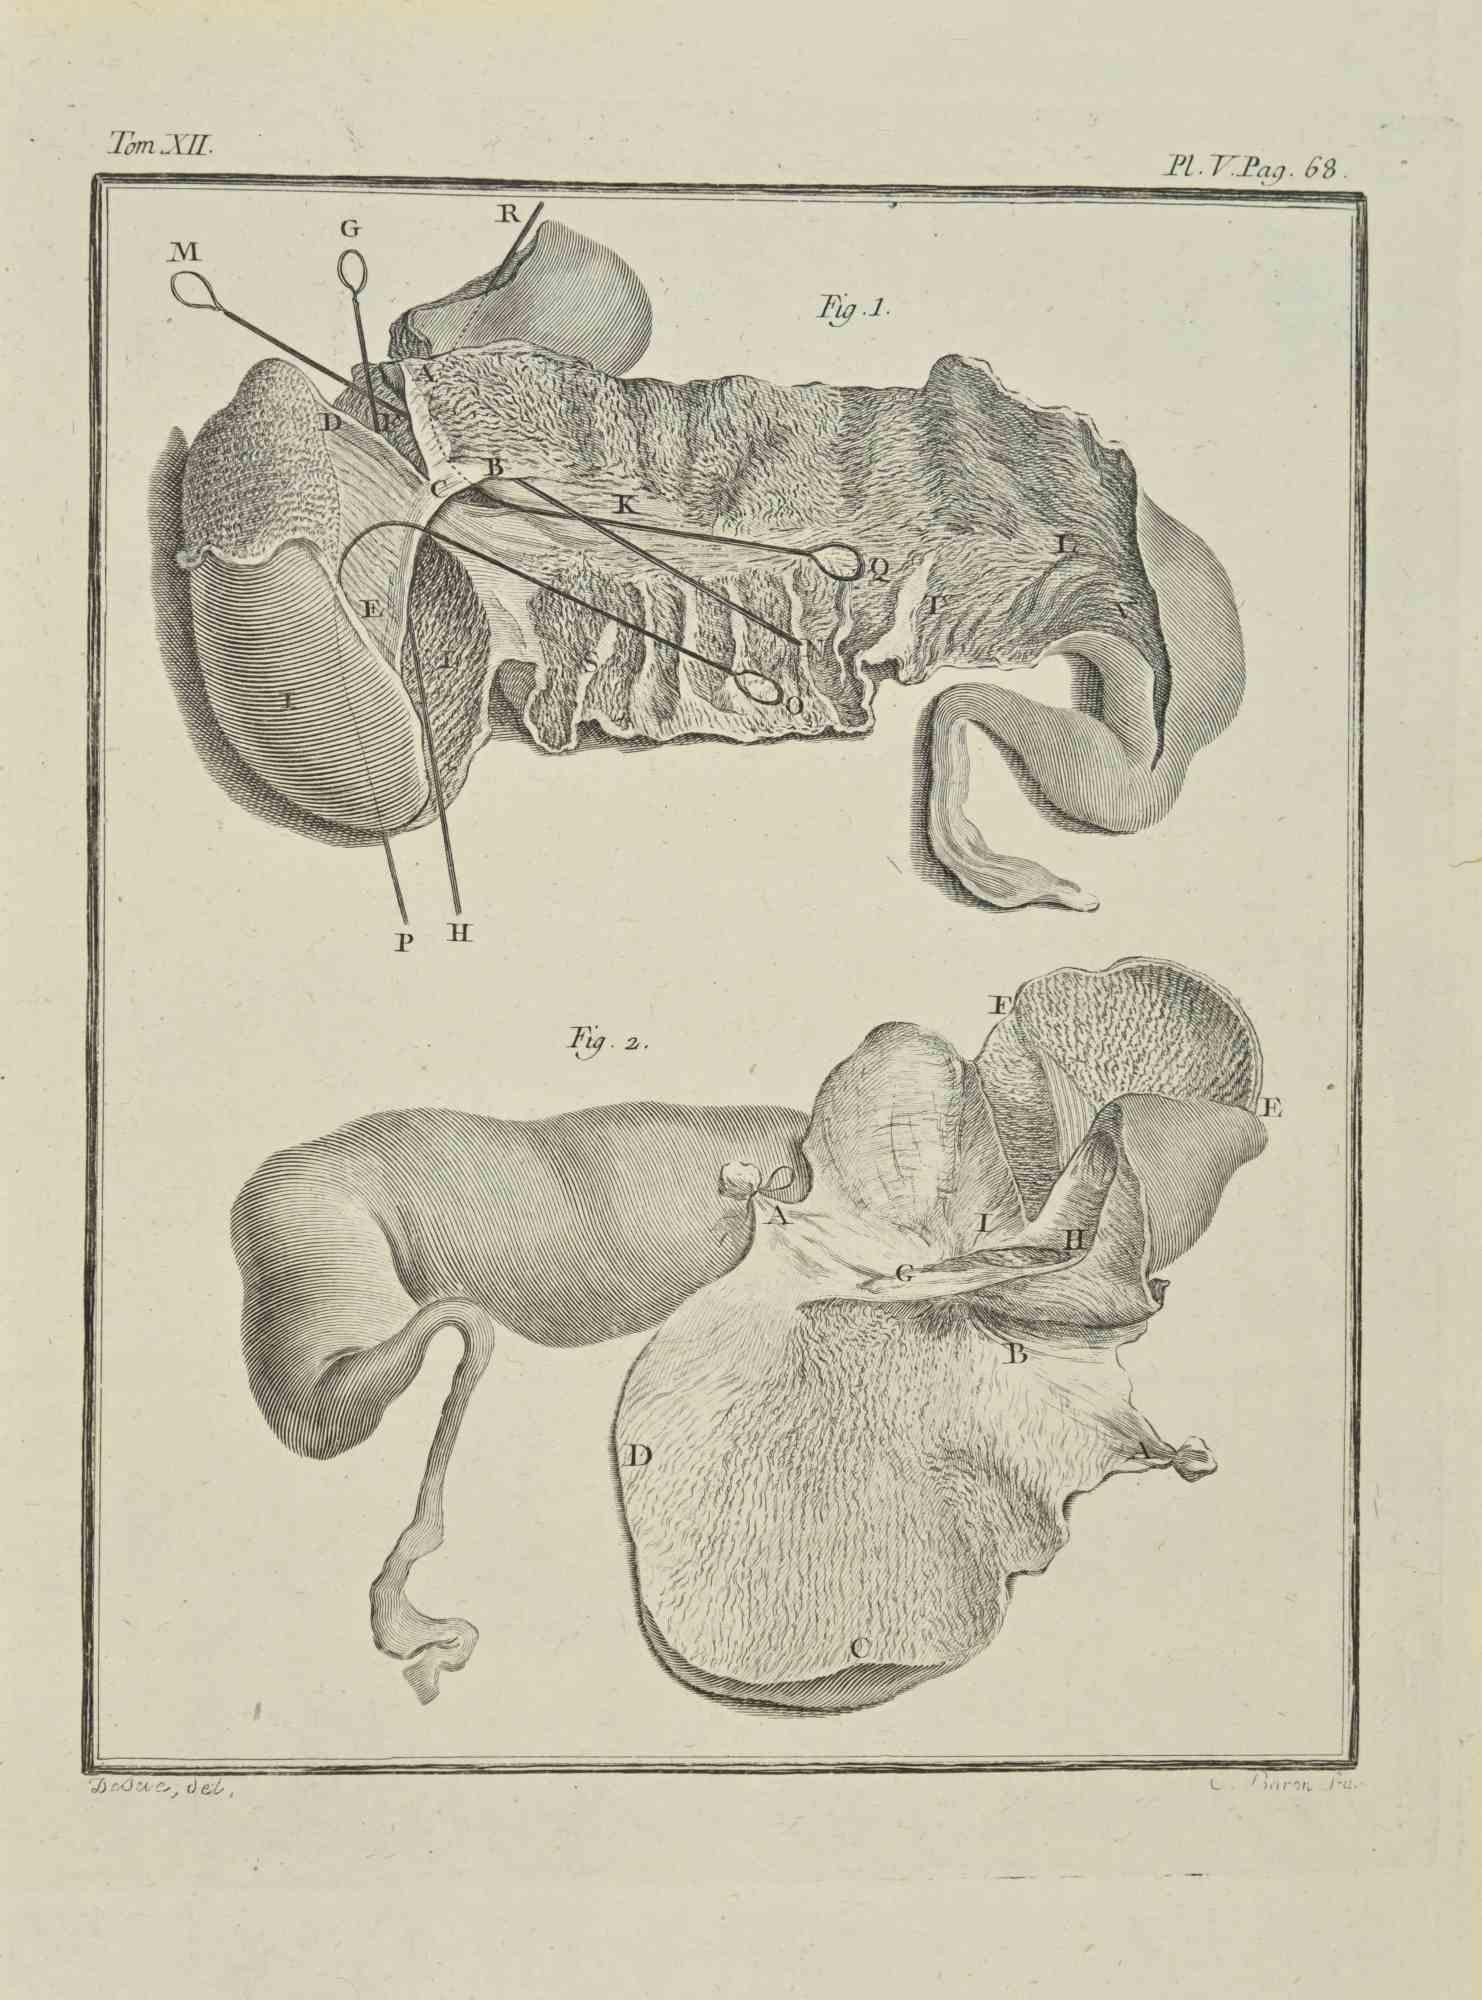 The Organs is an etching realized by Jacques Baron in 1771.

It belongs to the suite "Histoire Naturelle de Buffon".

The Artist's signature is engraved lower right.

Good conditions.